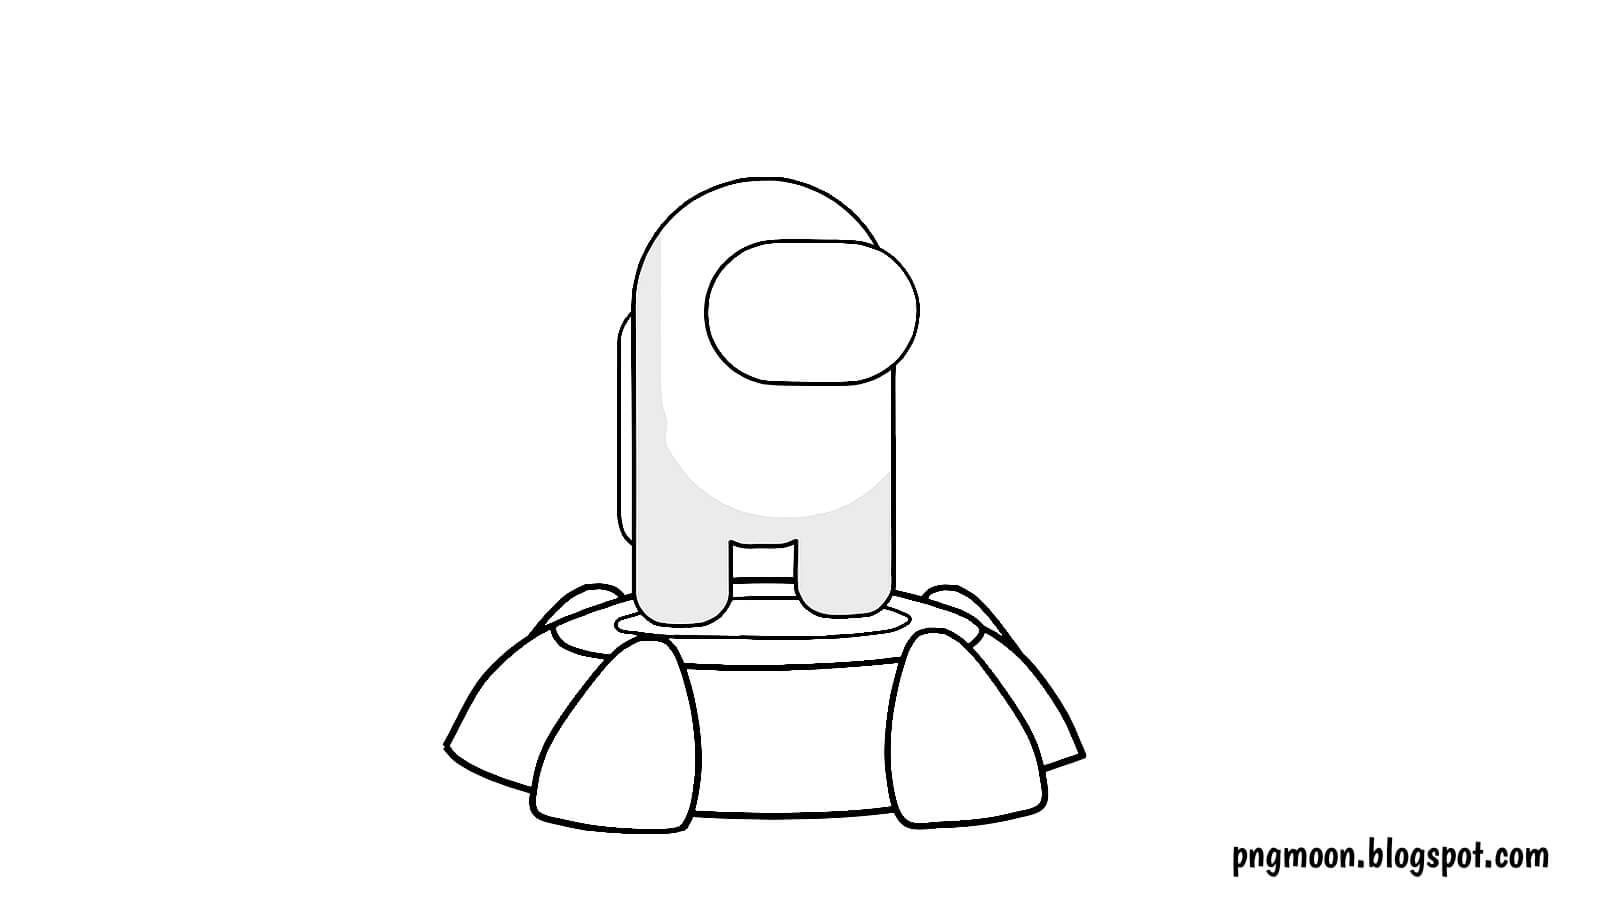 Among us coloring pages - pngmoon - Pngmoon- PNG images, Coloring Pages